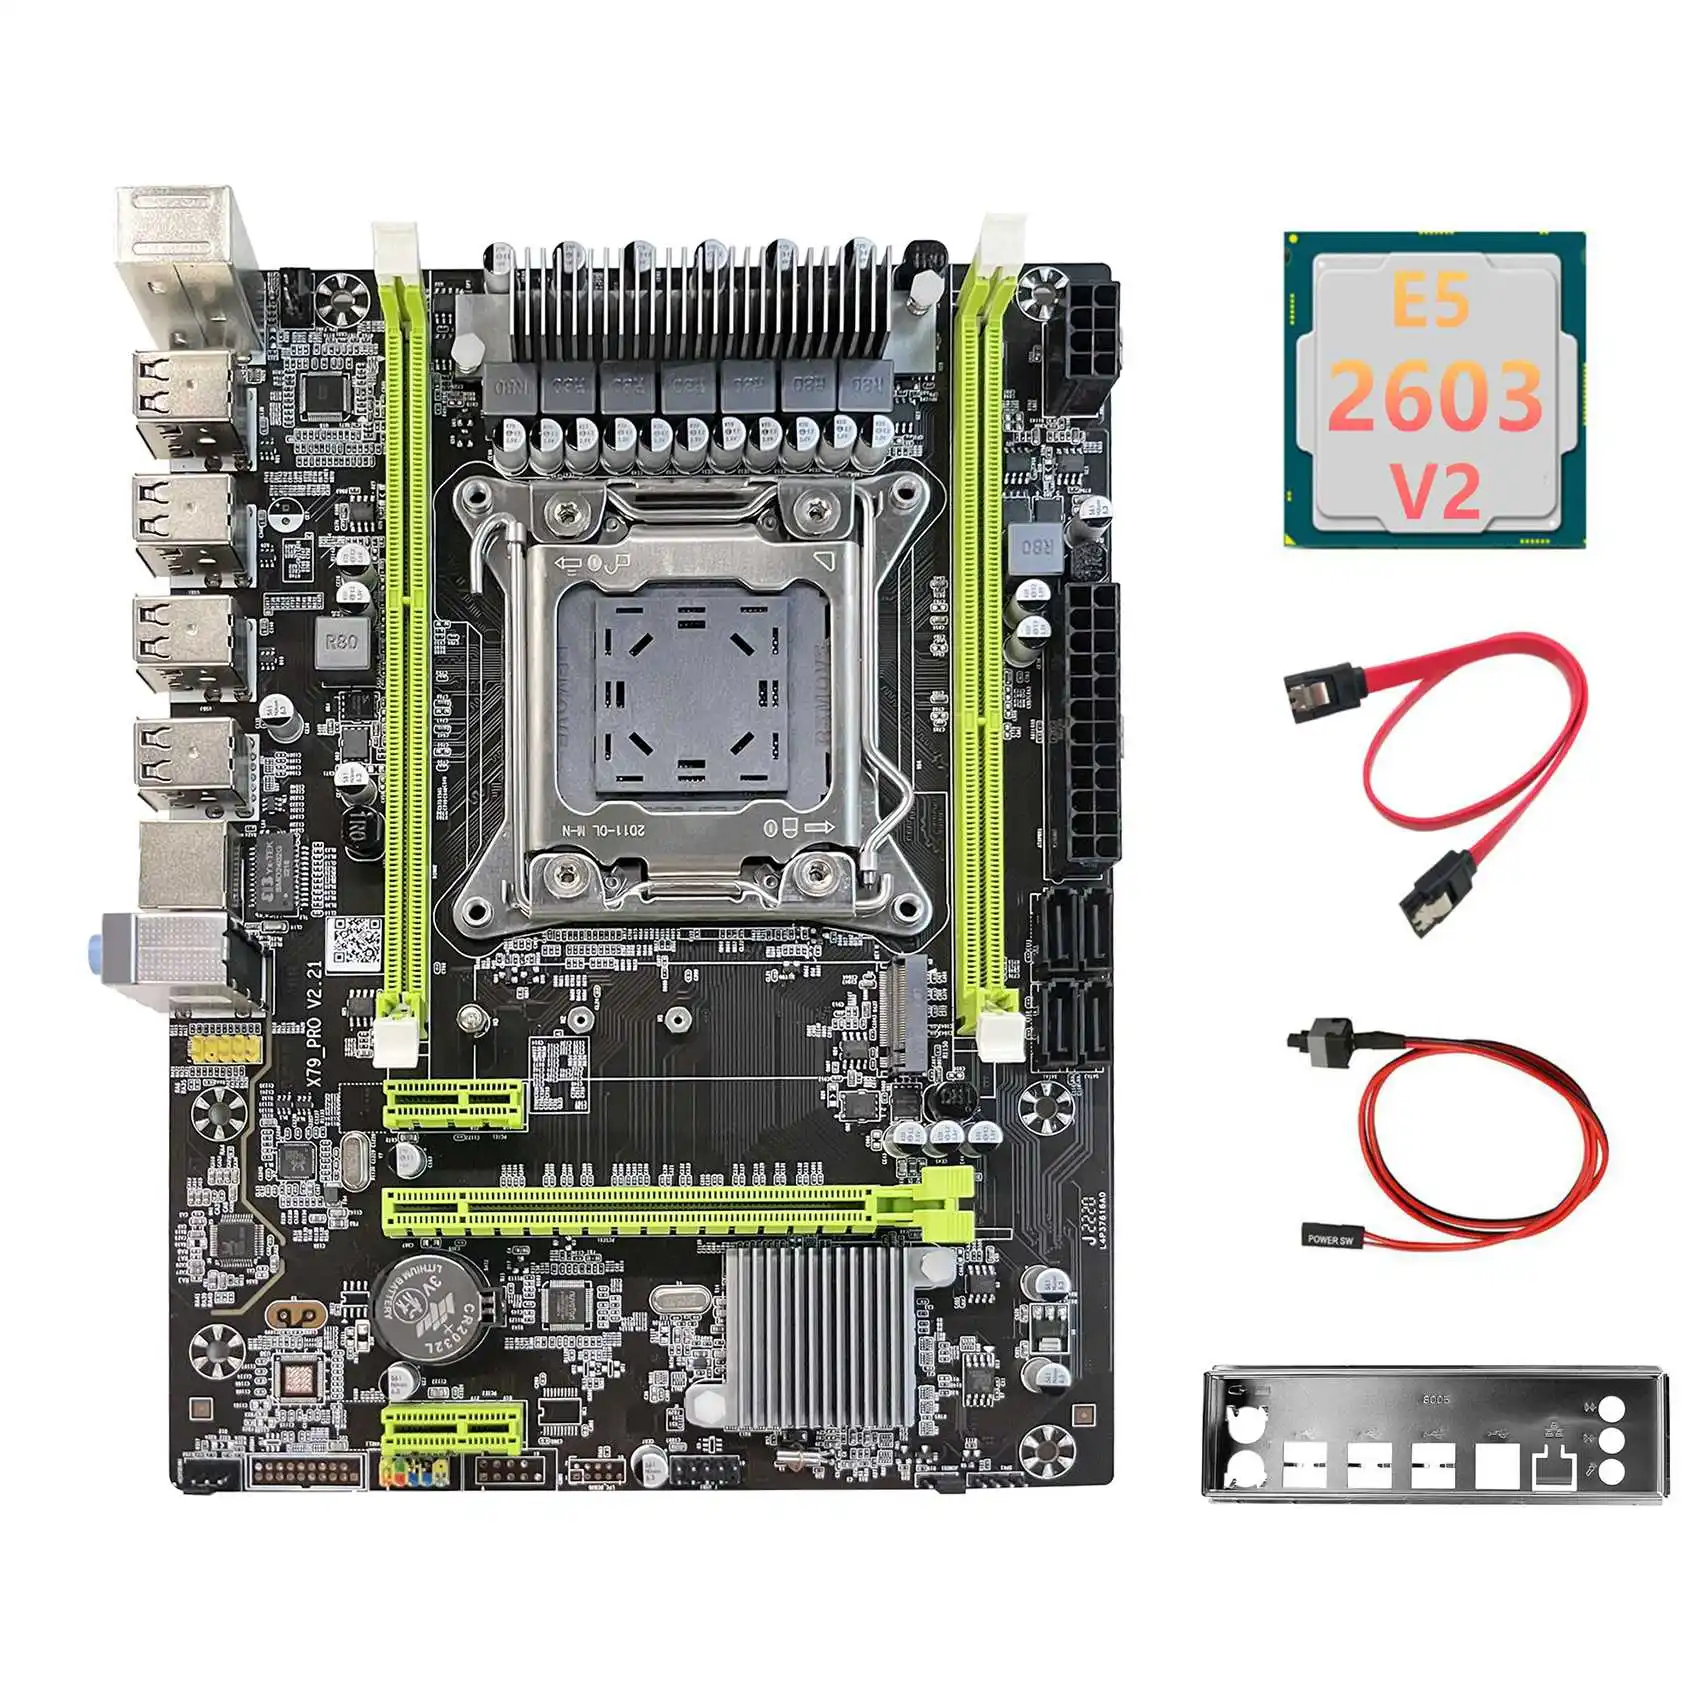 X79 Motherboard Upgrade X79 Pro+E5 2603 V2 CPU+SATA Cable+Switch Cable+Baffle M.2 NVME LGA2011 for LOL CF PUBG